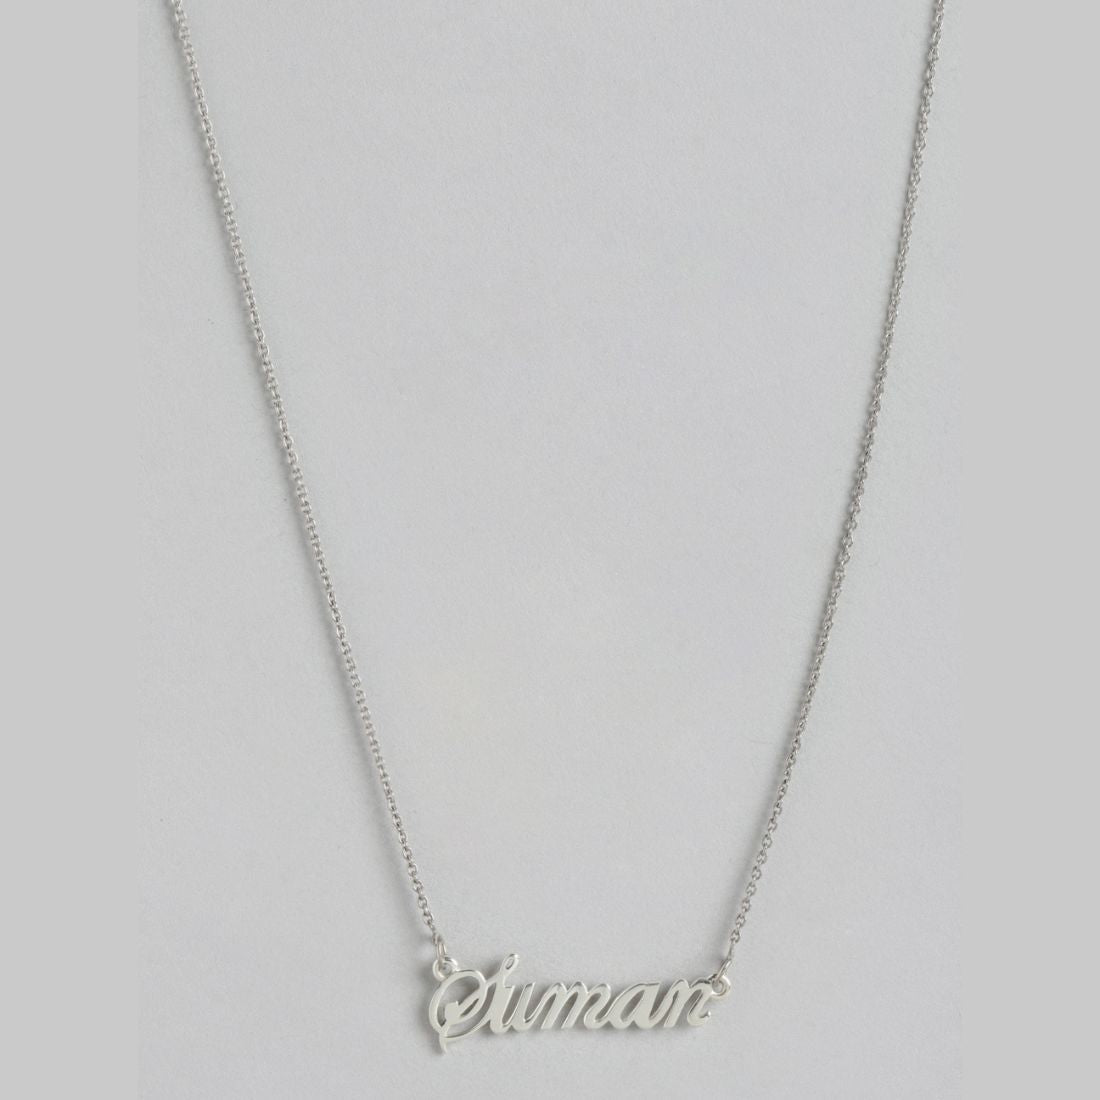 Personalized Eternal Pendant 925 Sterling Silver With Cable Chain